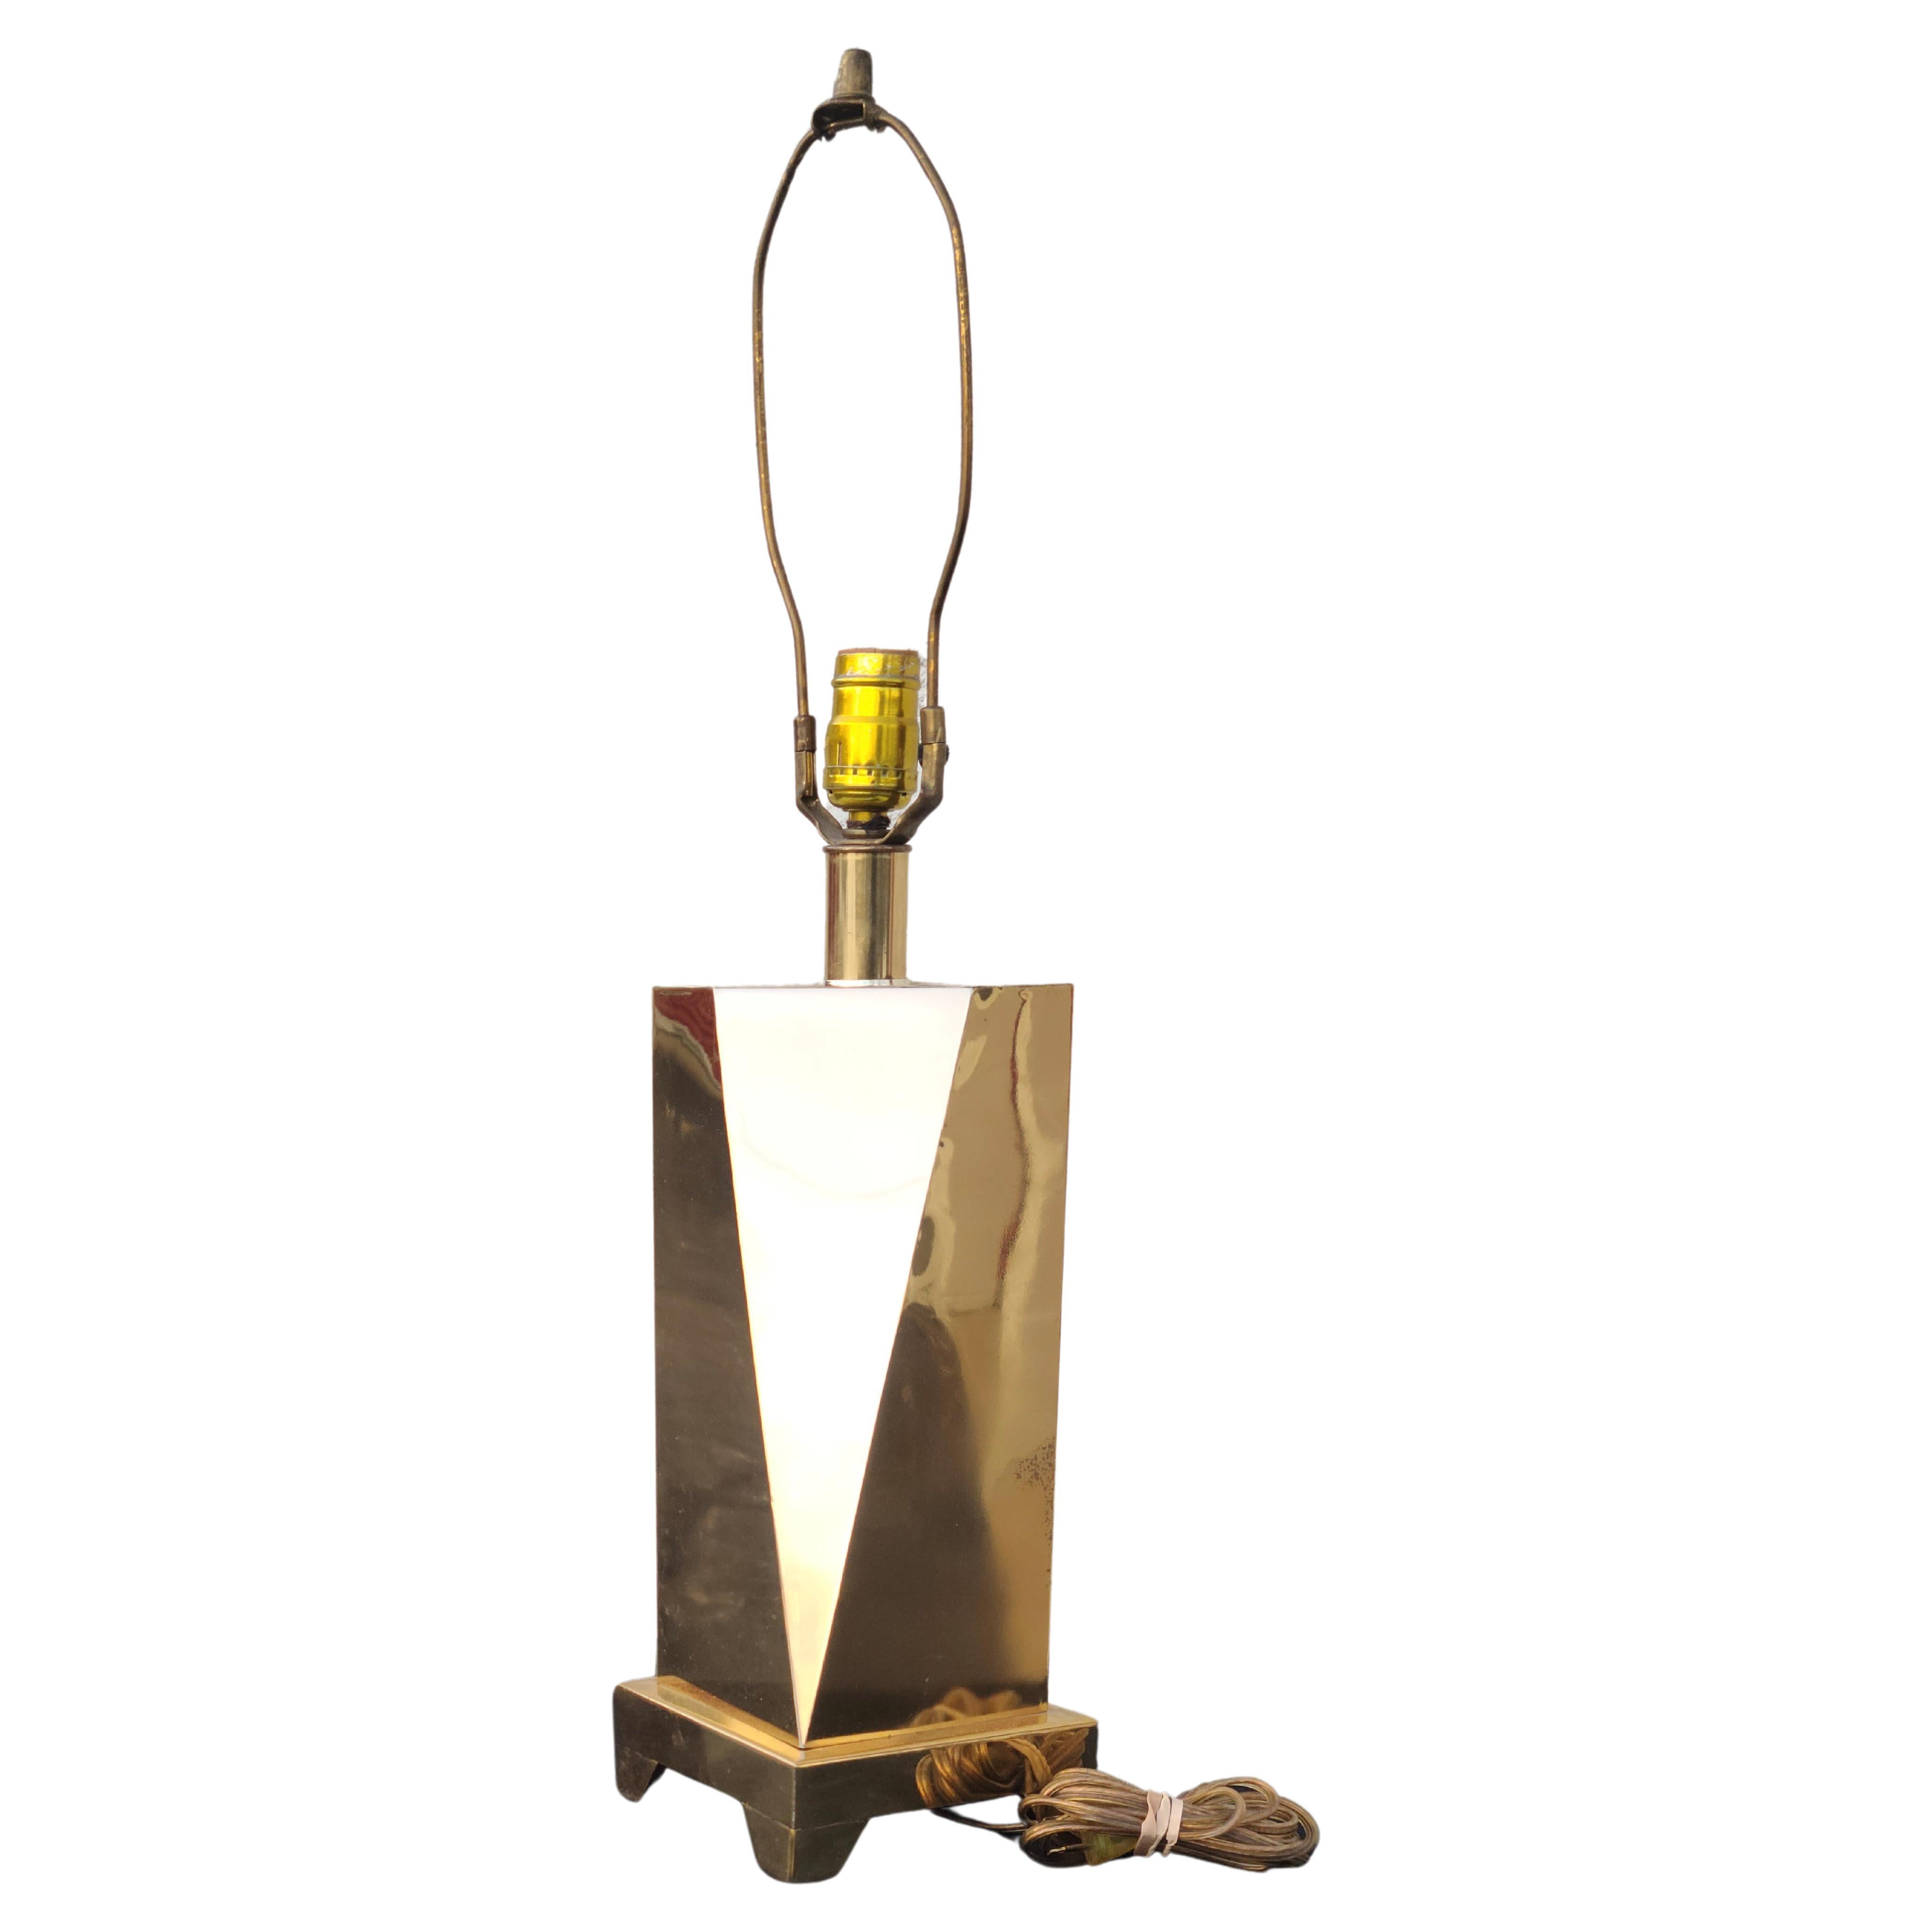 Curtis Jere Faceted Lamp Chrome Brass Cityscape 